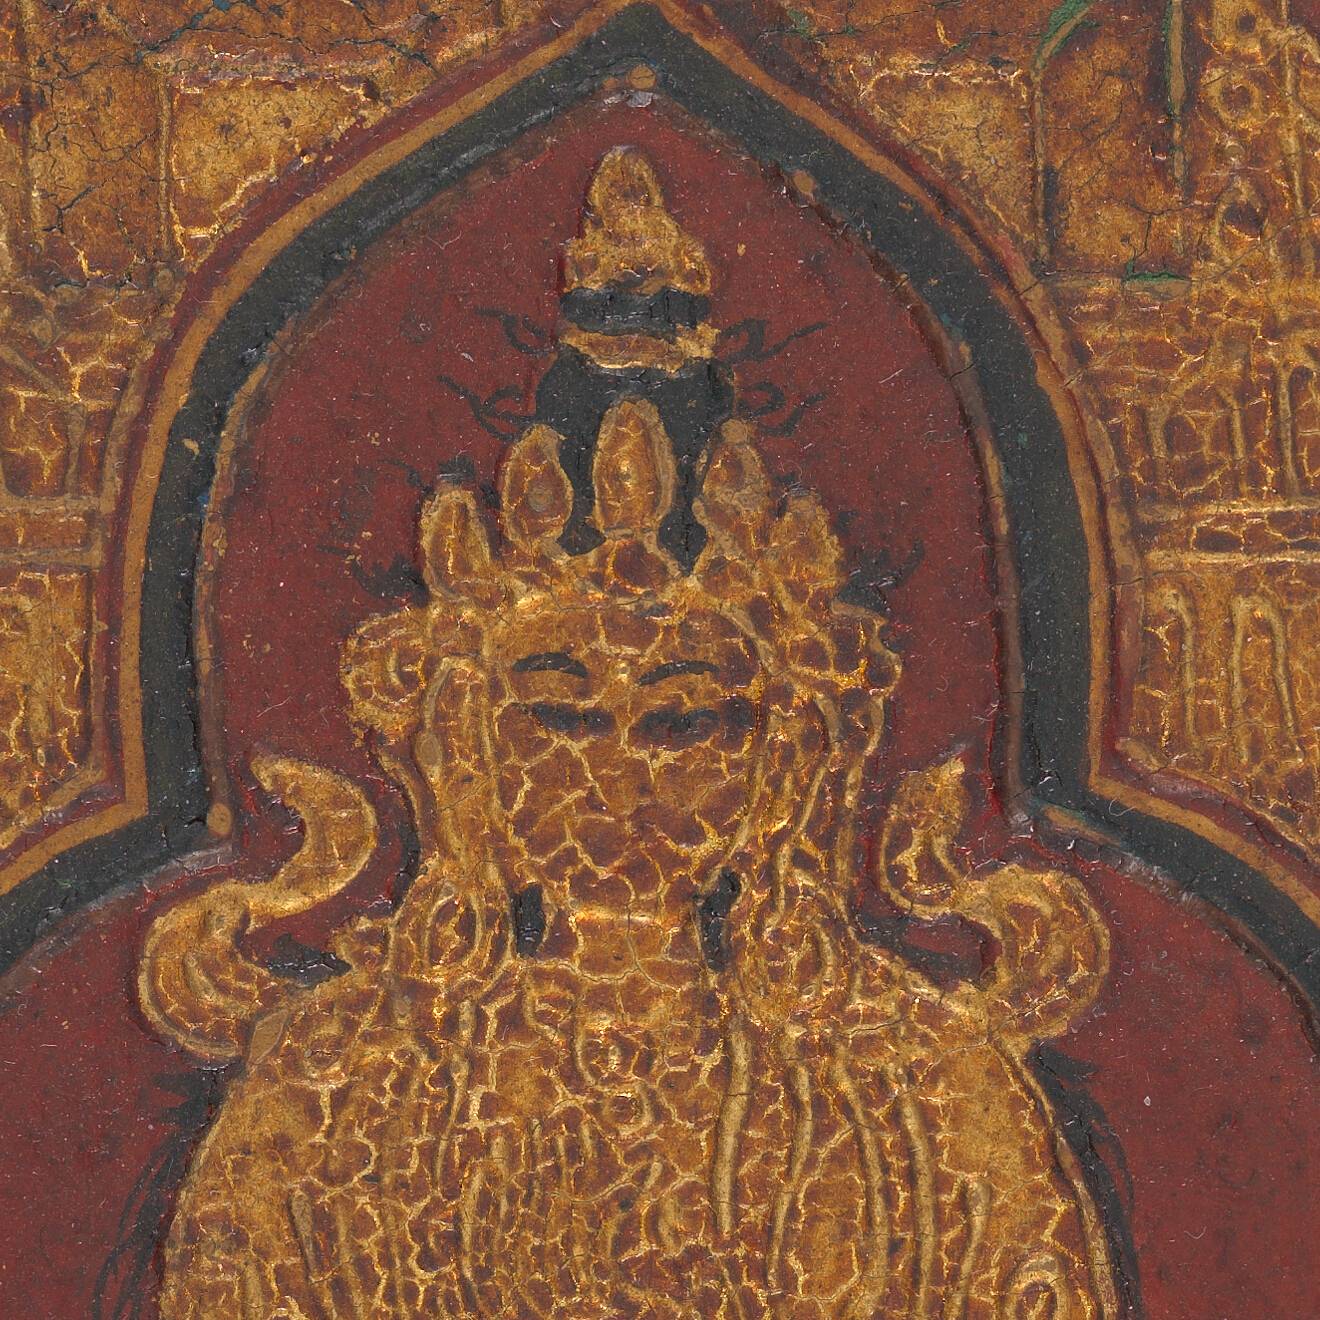 Close up of gilded face with cracked dark orange-brown coating obscuring the details of the figure.